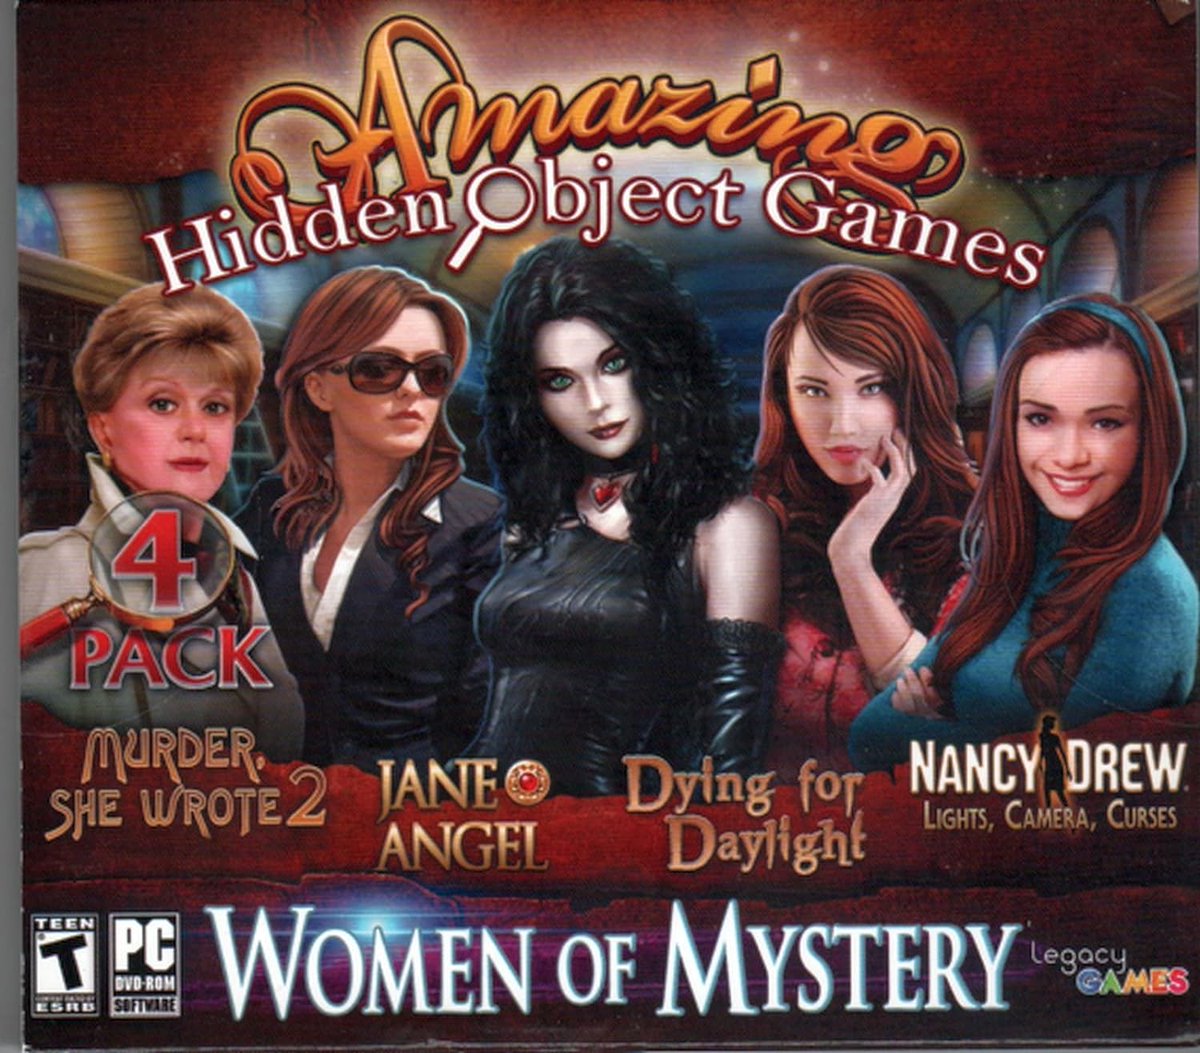 Women of Mystery: Amazing Hidden Object Games (4 Game Pack) PC - Murder, She Wrote 2: Return to Cabot Cove, Nancy Drew: Lights, Camera, Curses and More! Available Here: amazon.com/dp/B00IO29W0K?… #mystery #murdershewrote